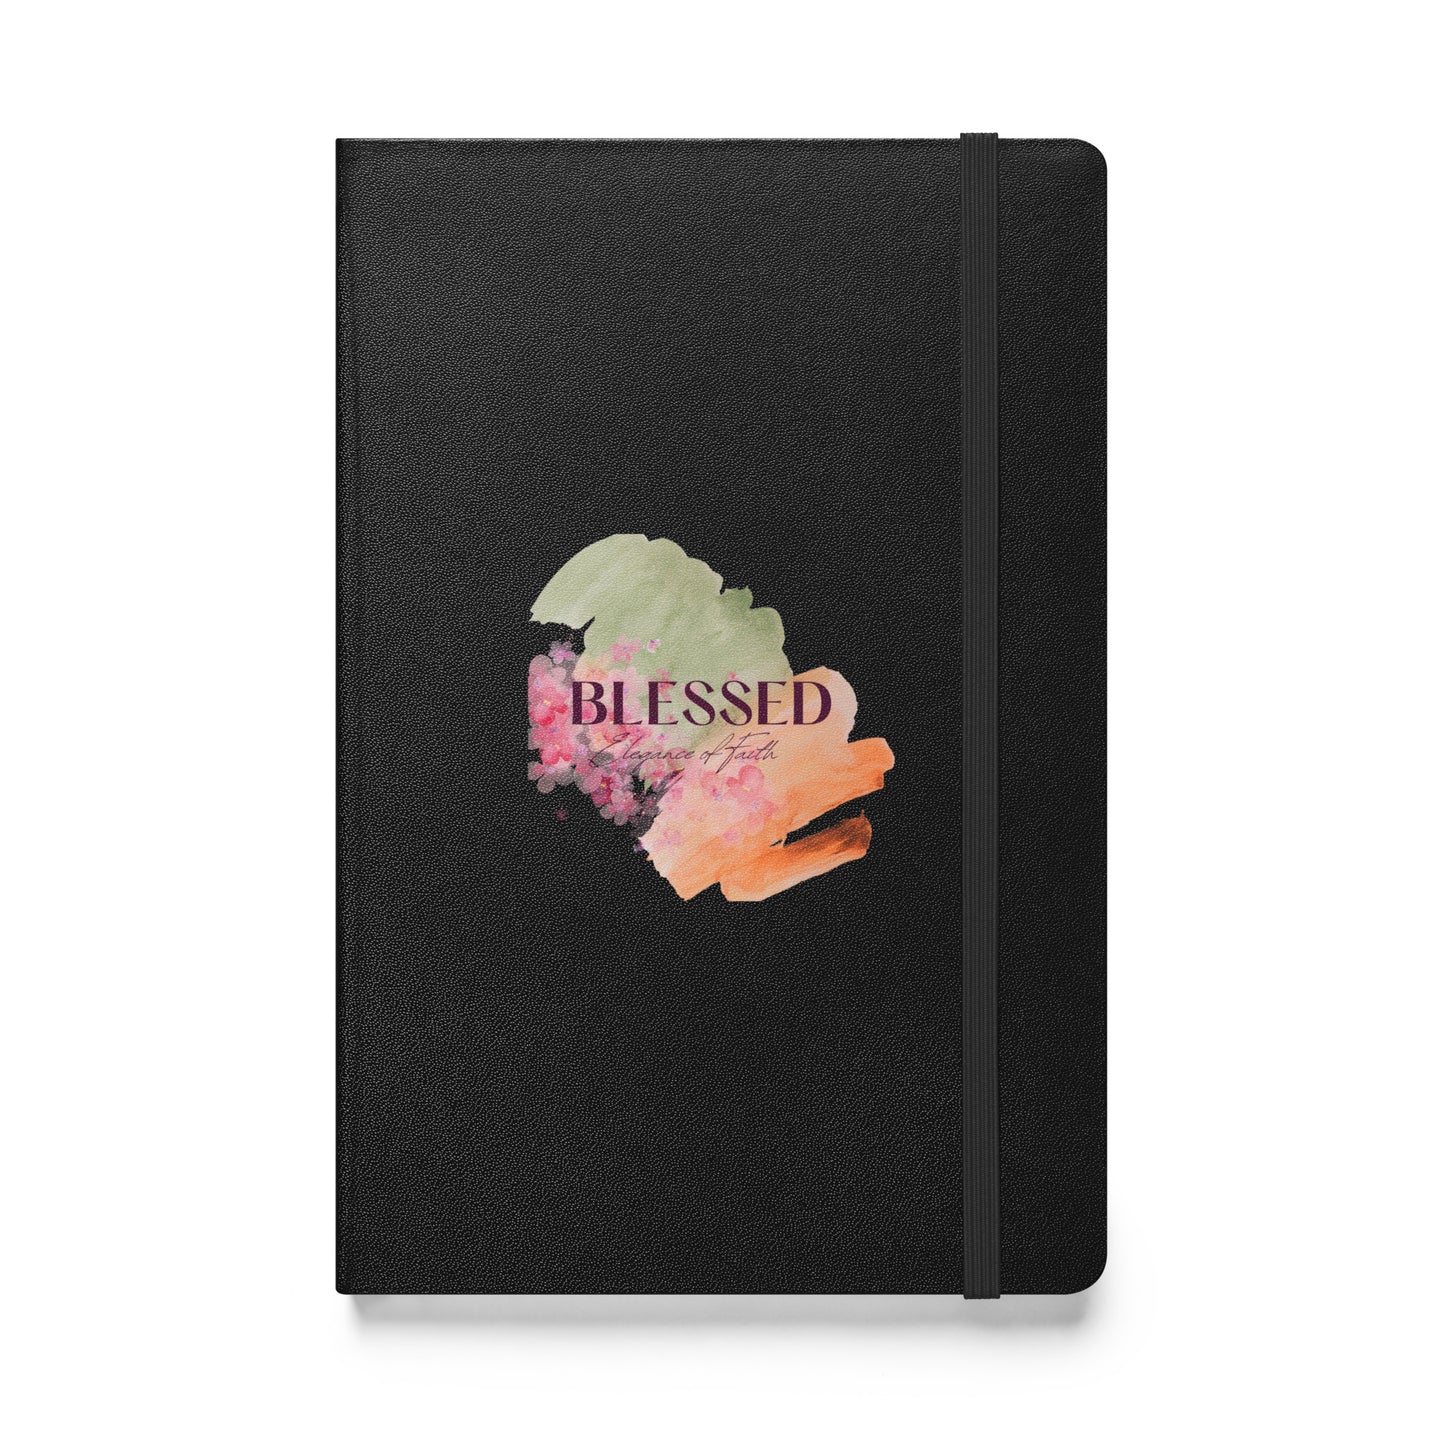 BLESSED Hardcover bound notebook